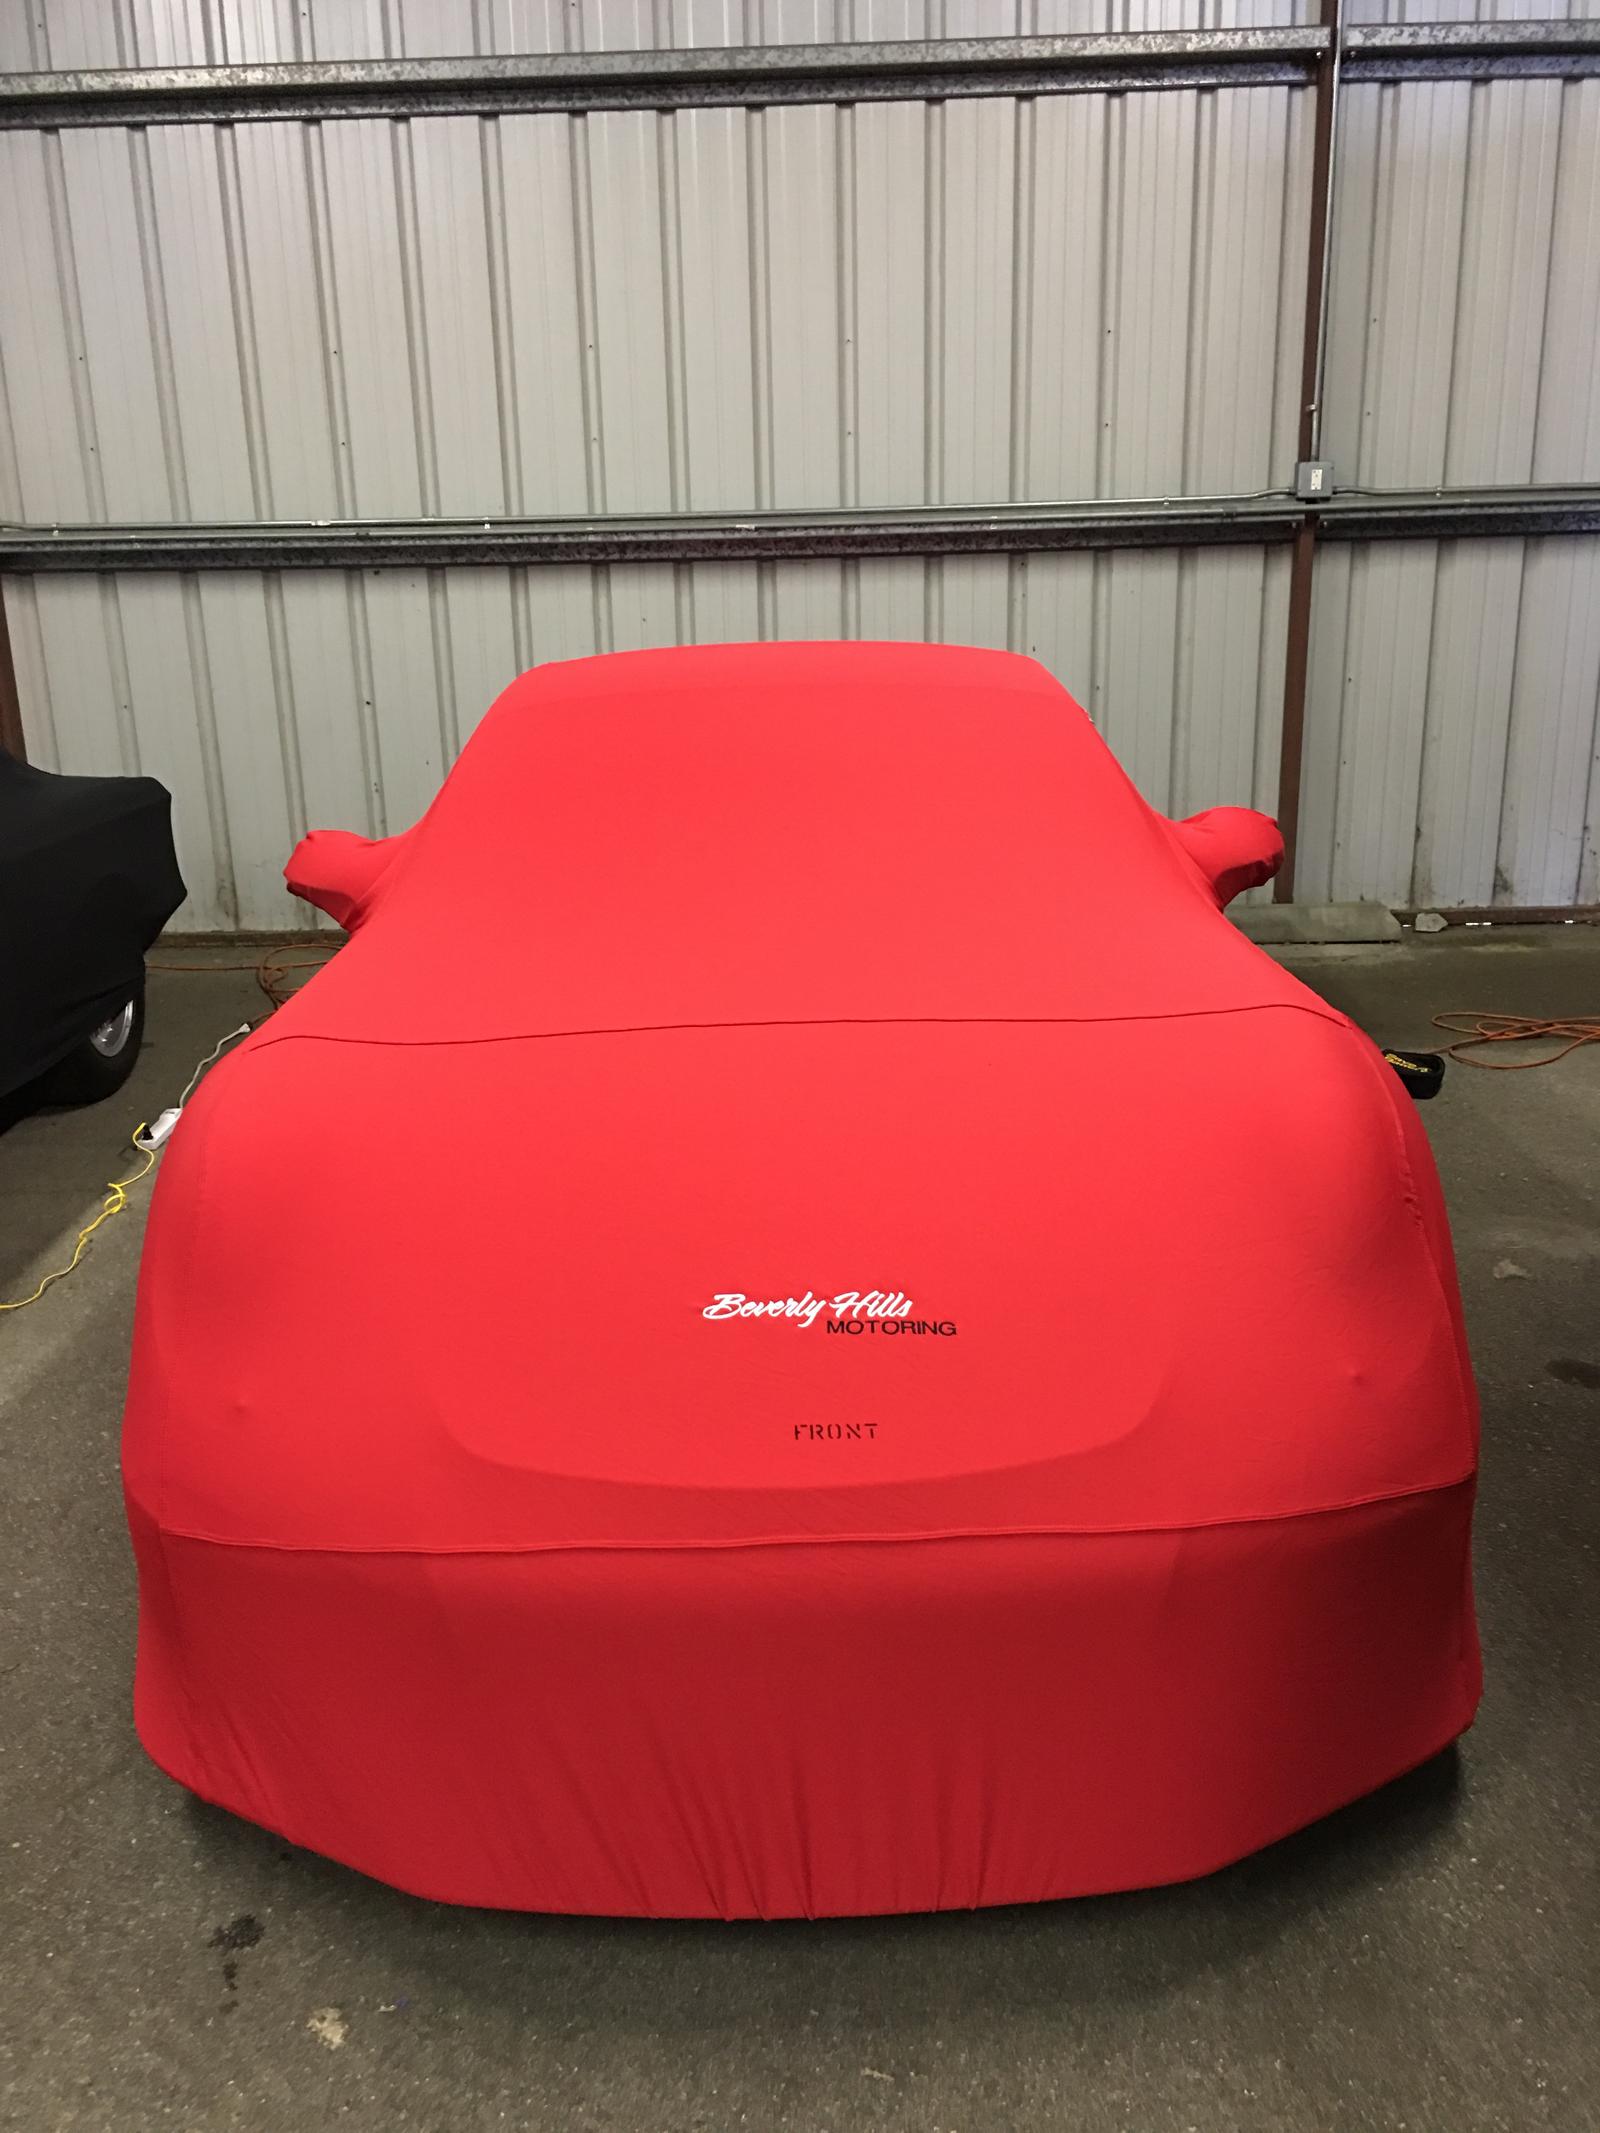 What is the best car cover for a Porsche? - Beverly Hills Motoring